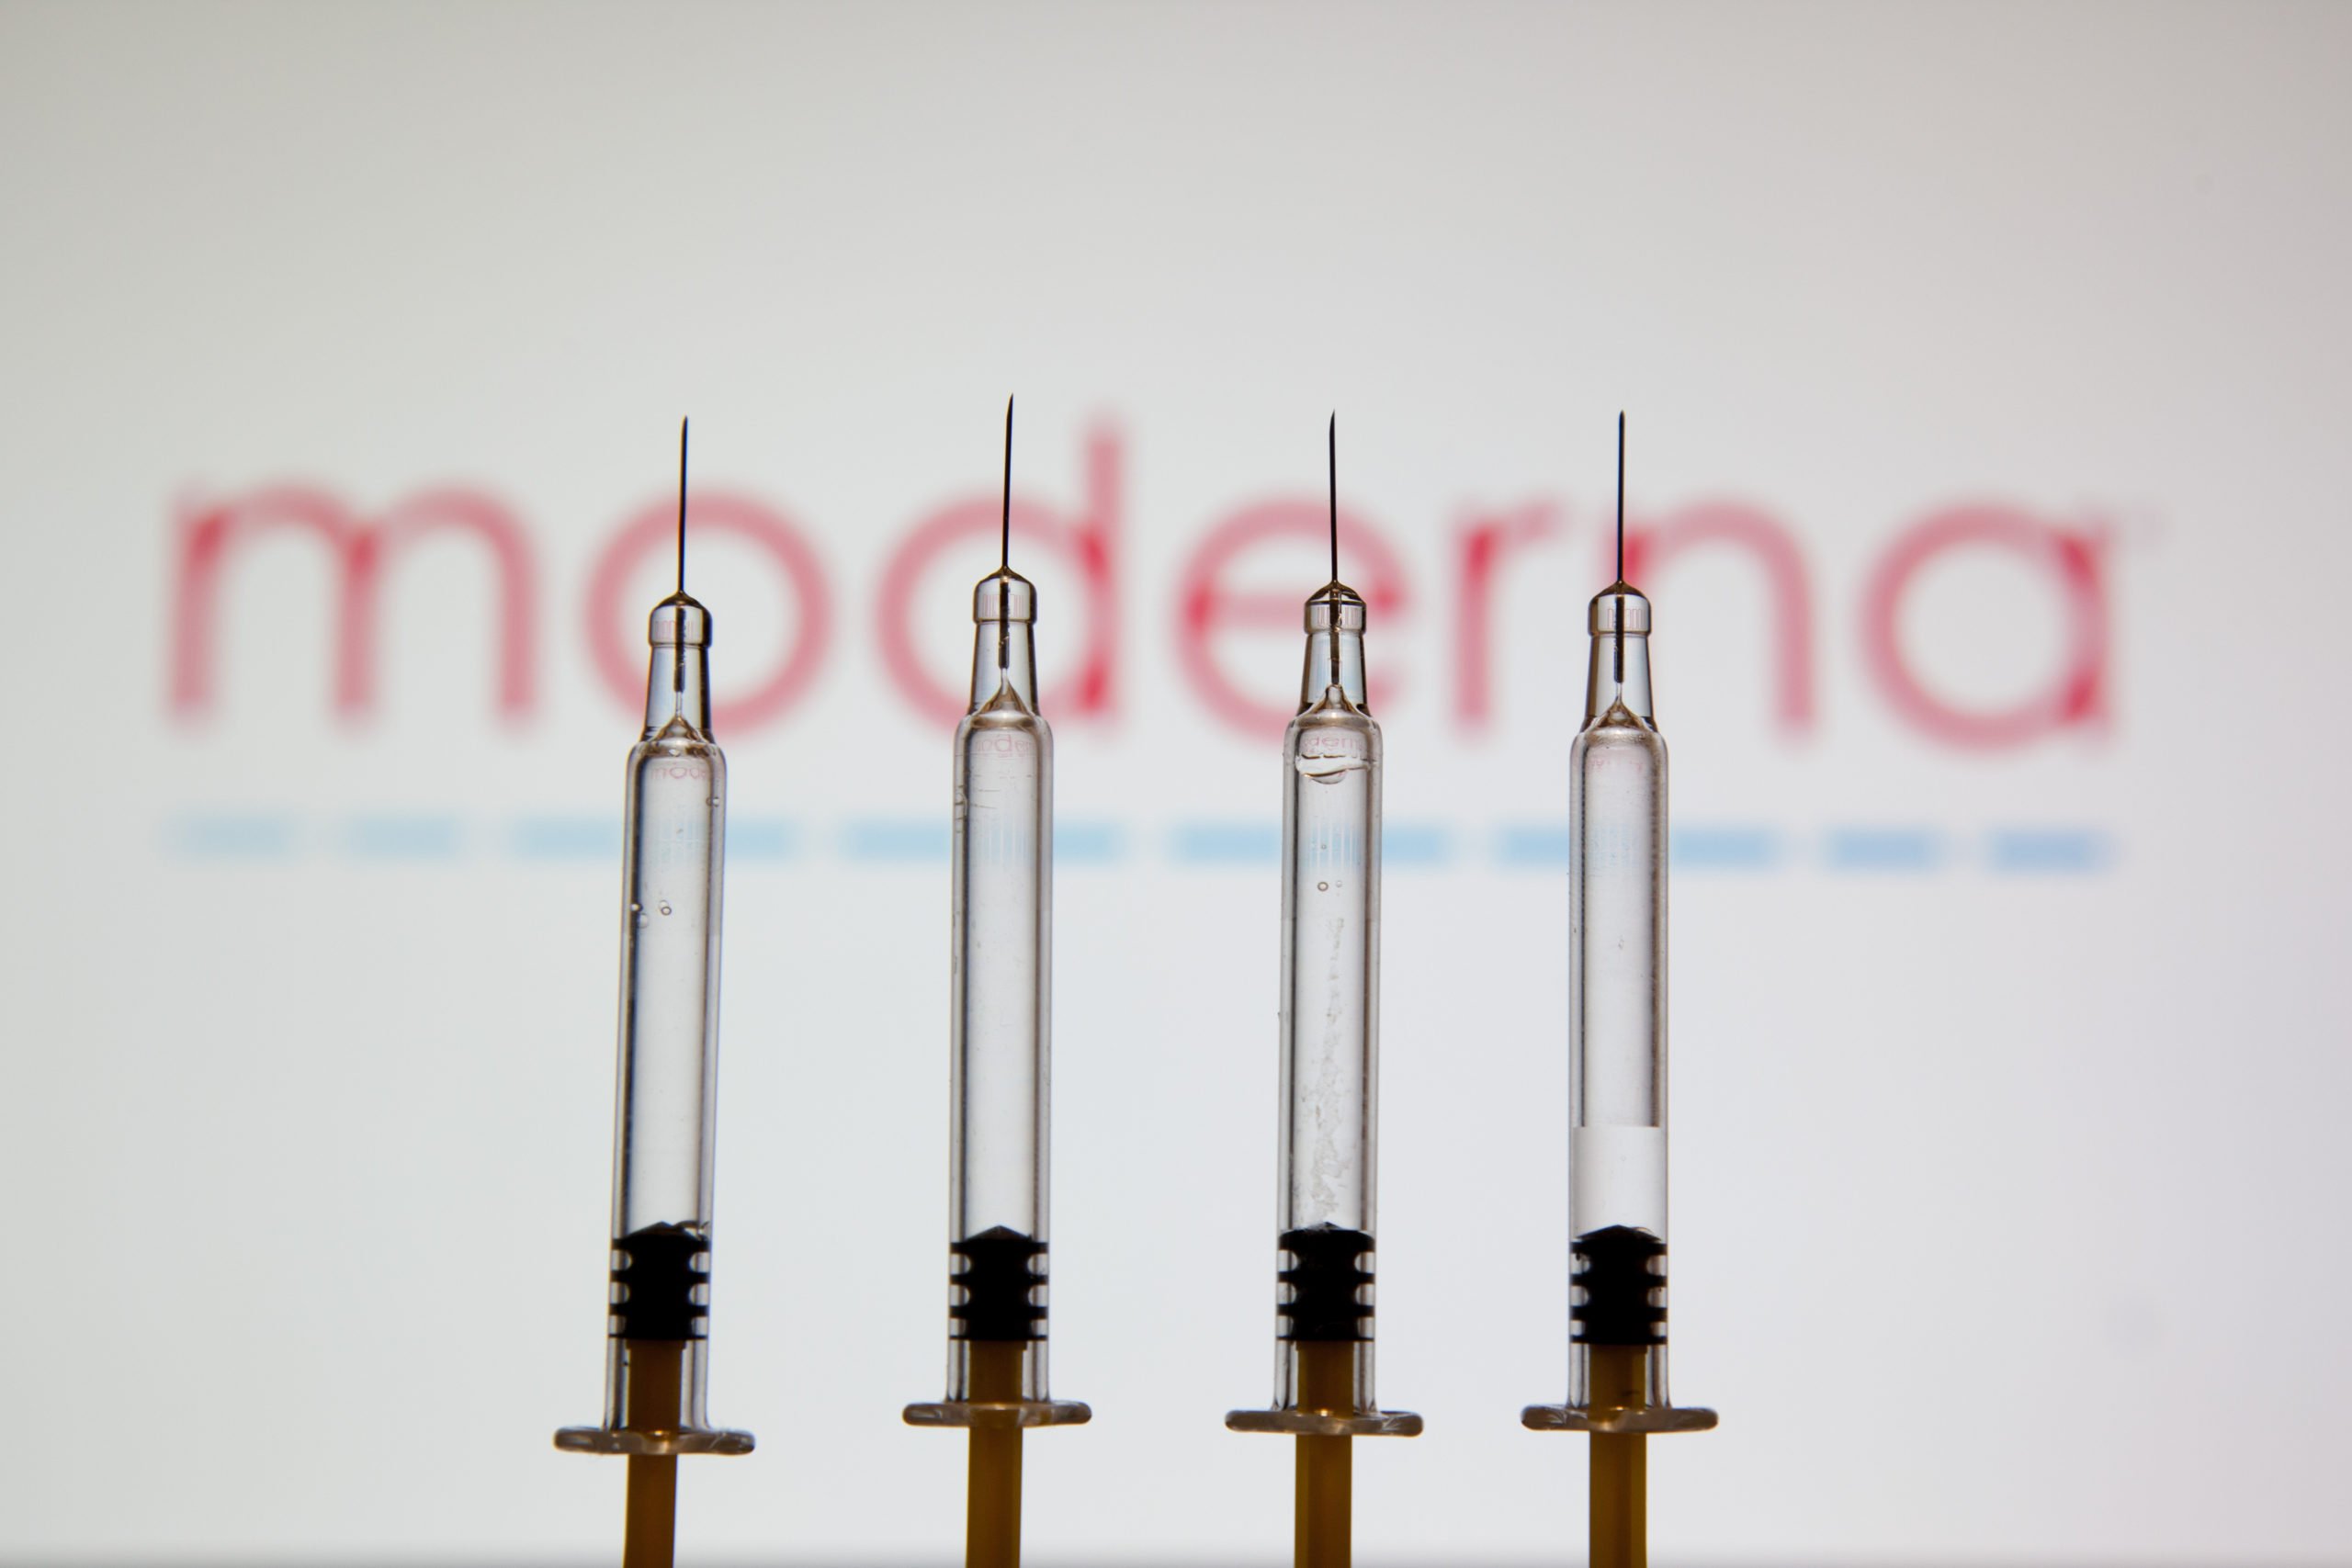 Moderna Becomes Second Company To Distribute FDA Approved COVID-19 Vaccine